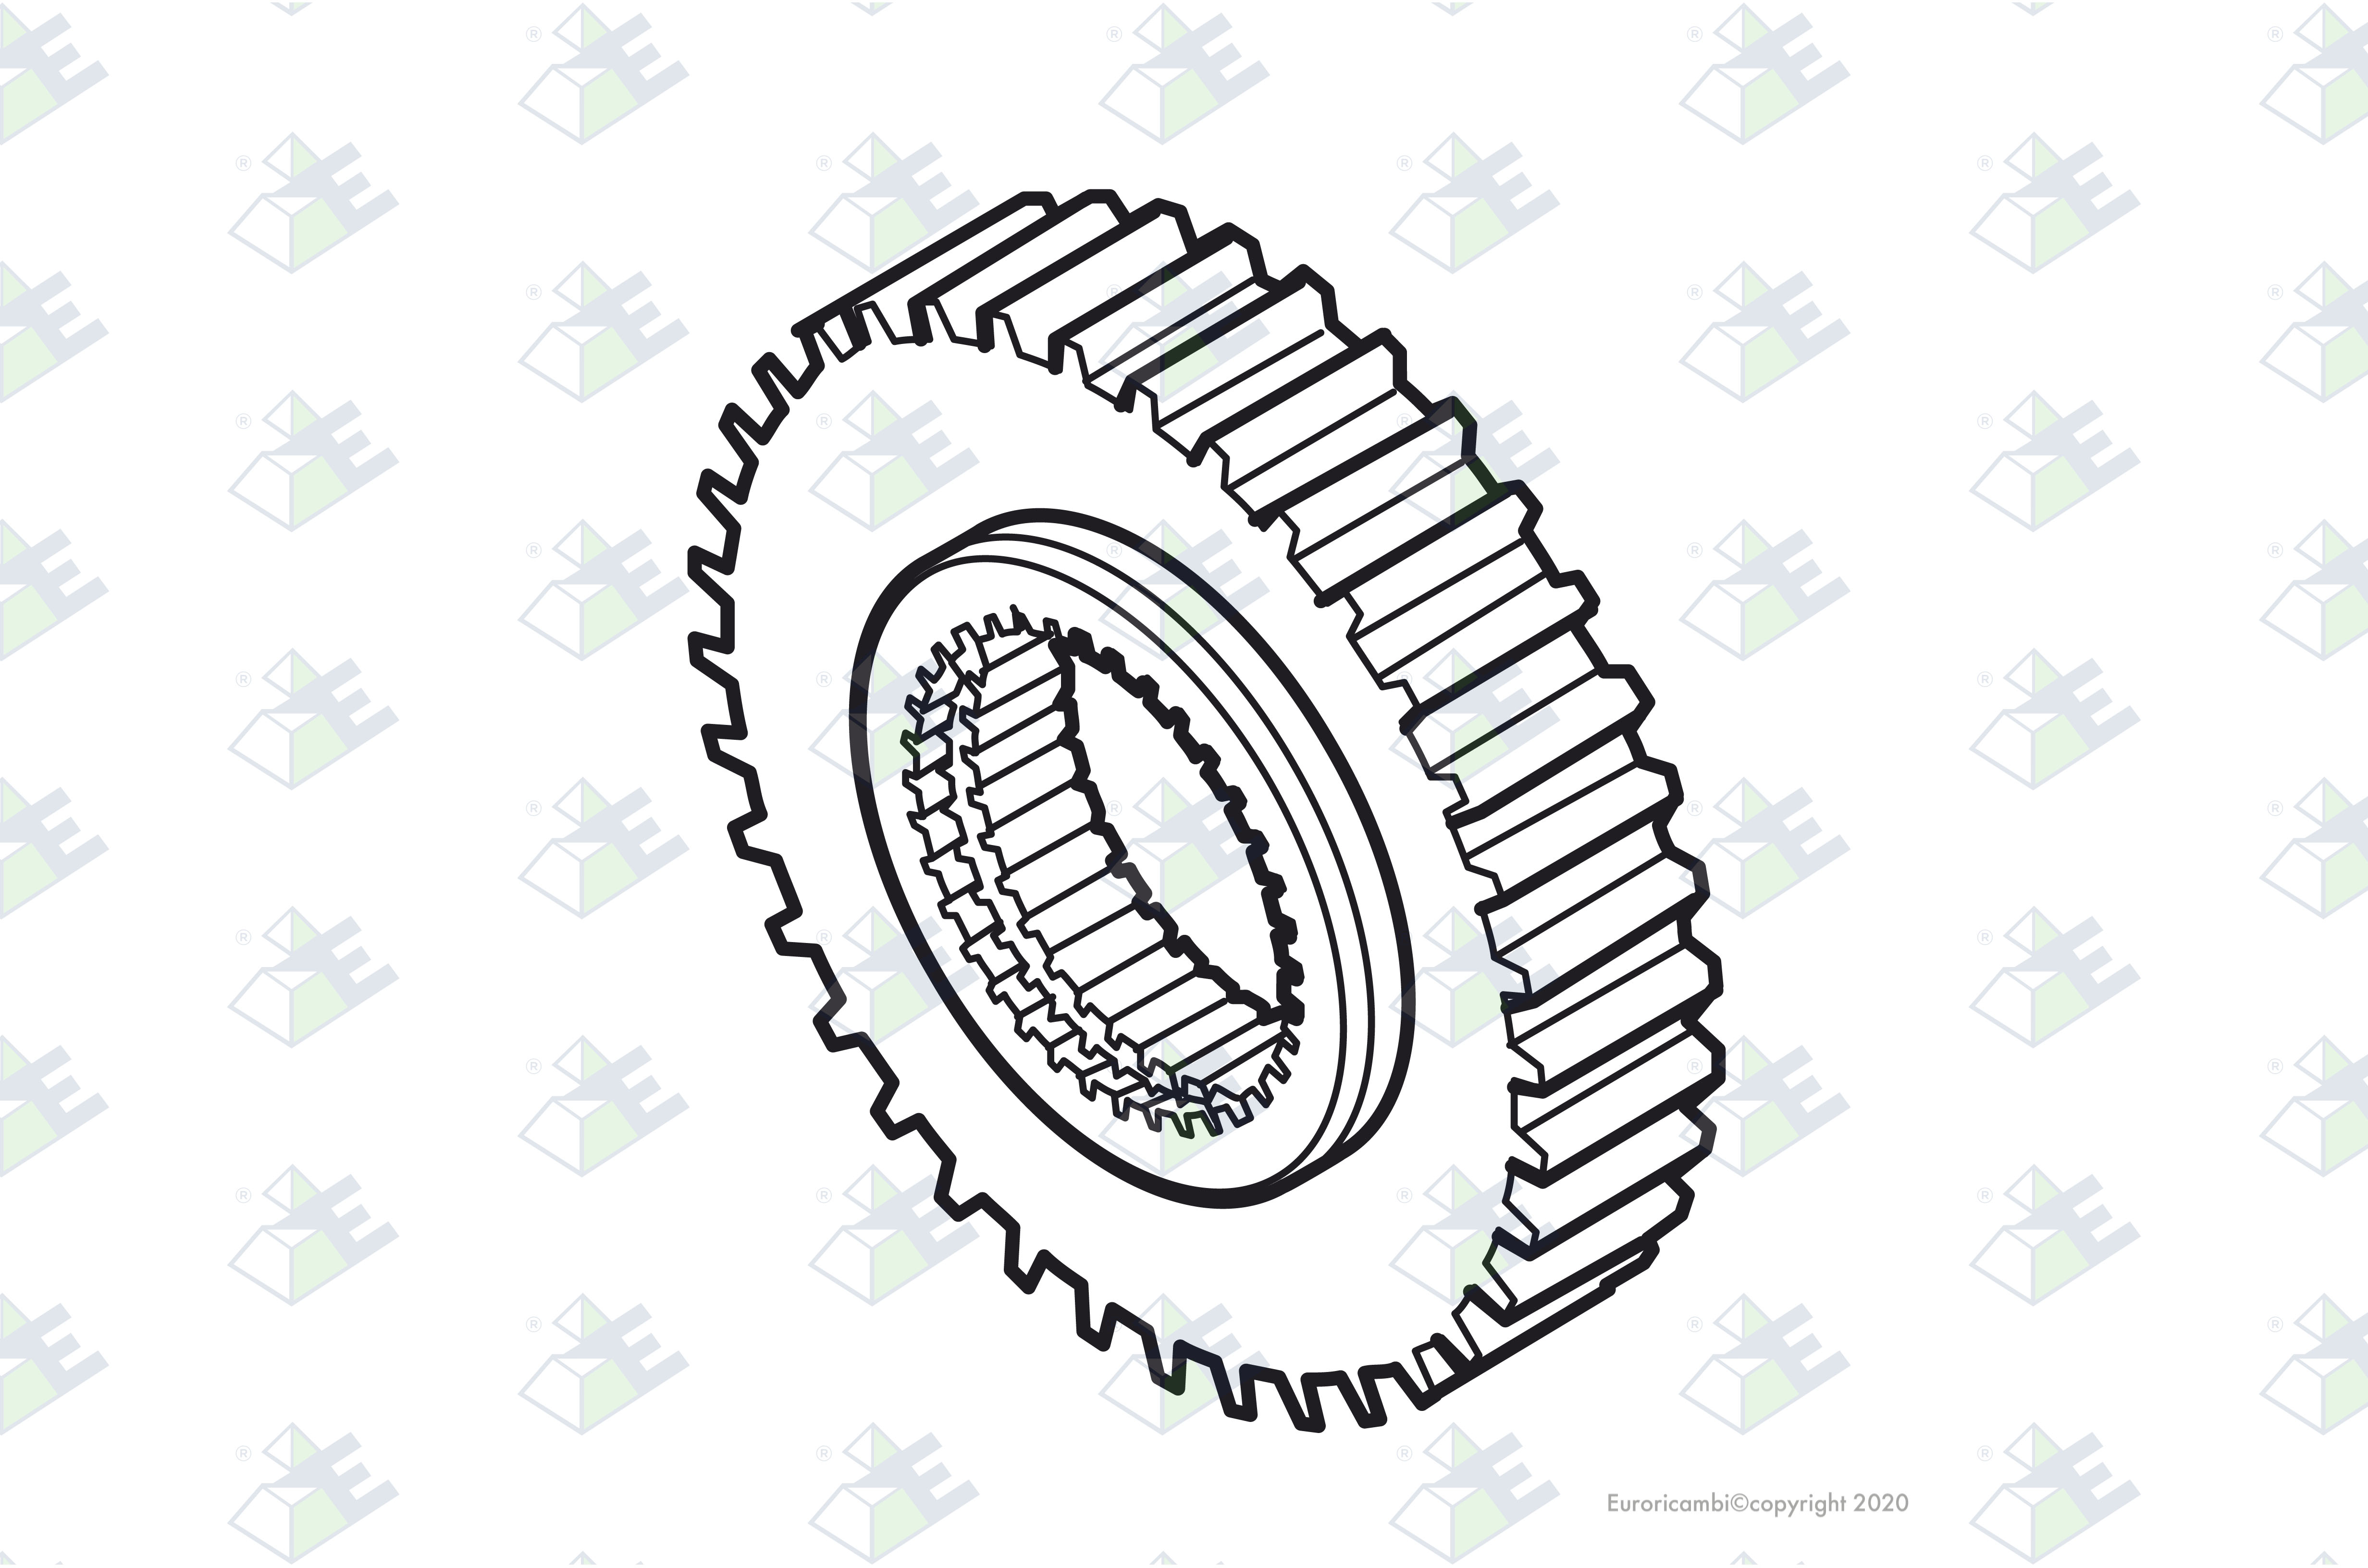 GEAR M/S 26 T. suitable to EATON - FULLER 18438